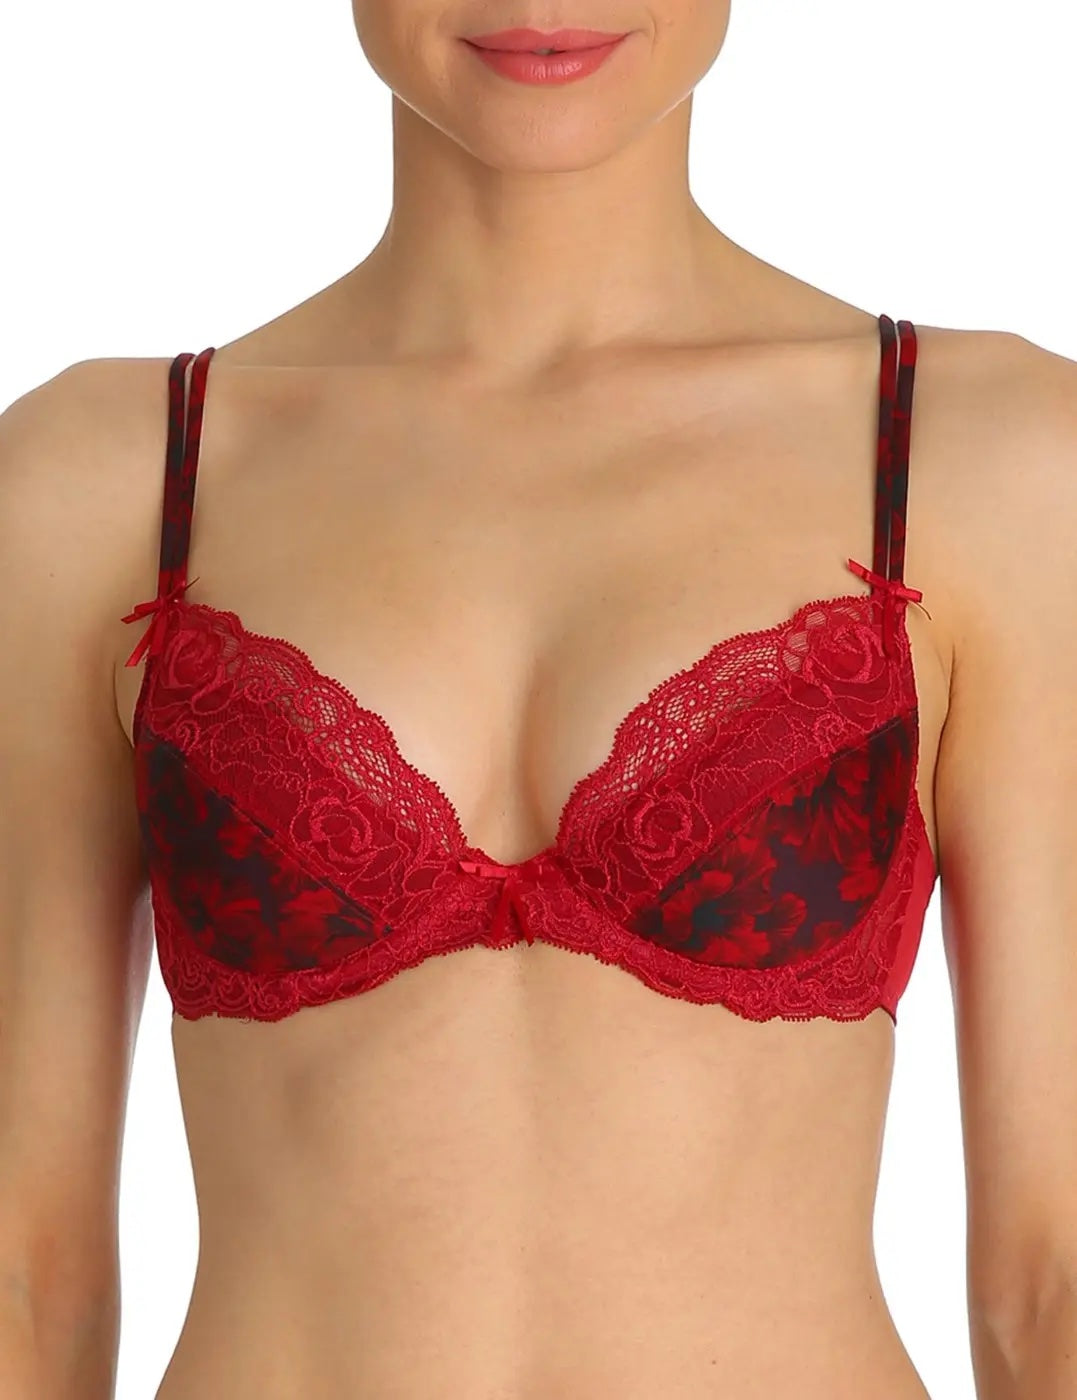 MARIE JO AXELLE PLUNGING PUSH-UP BRA